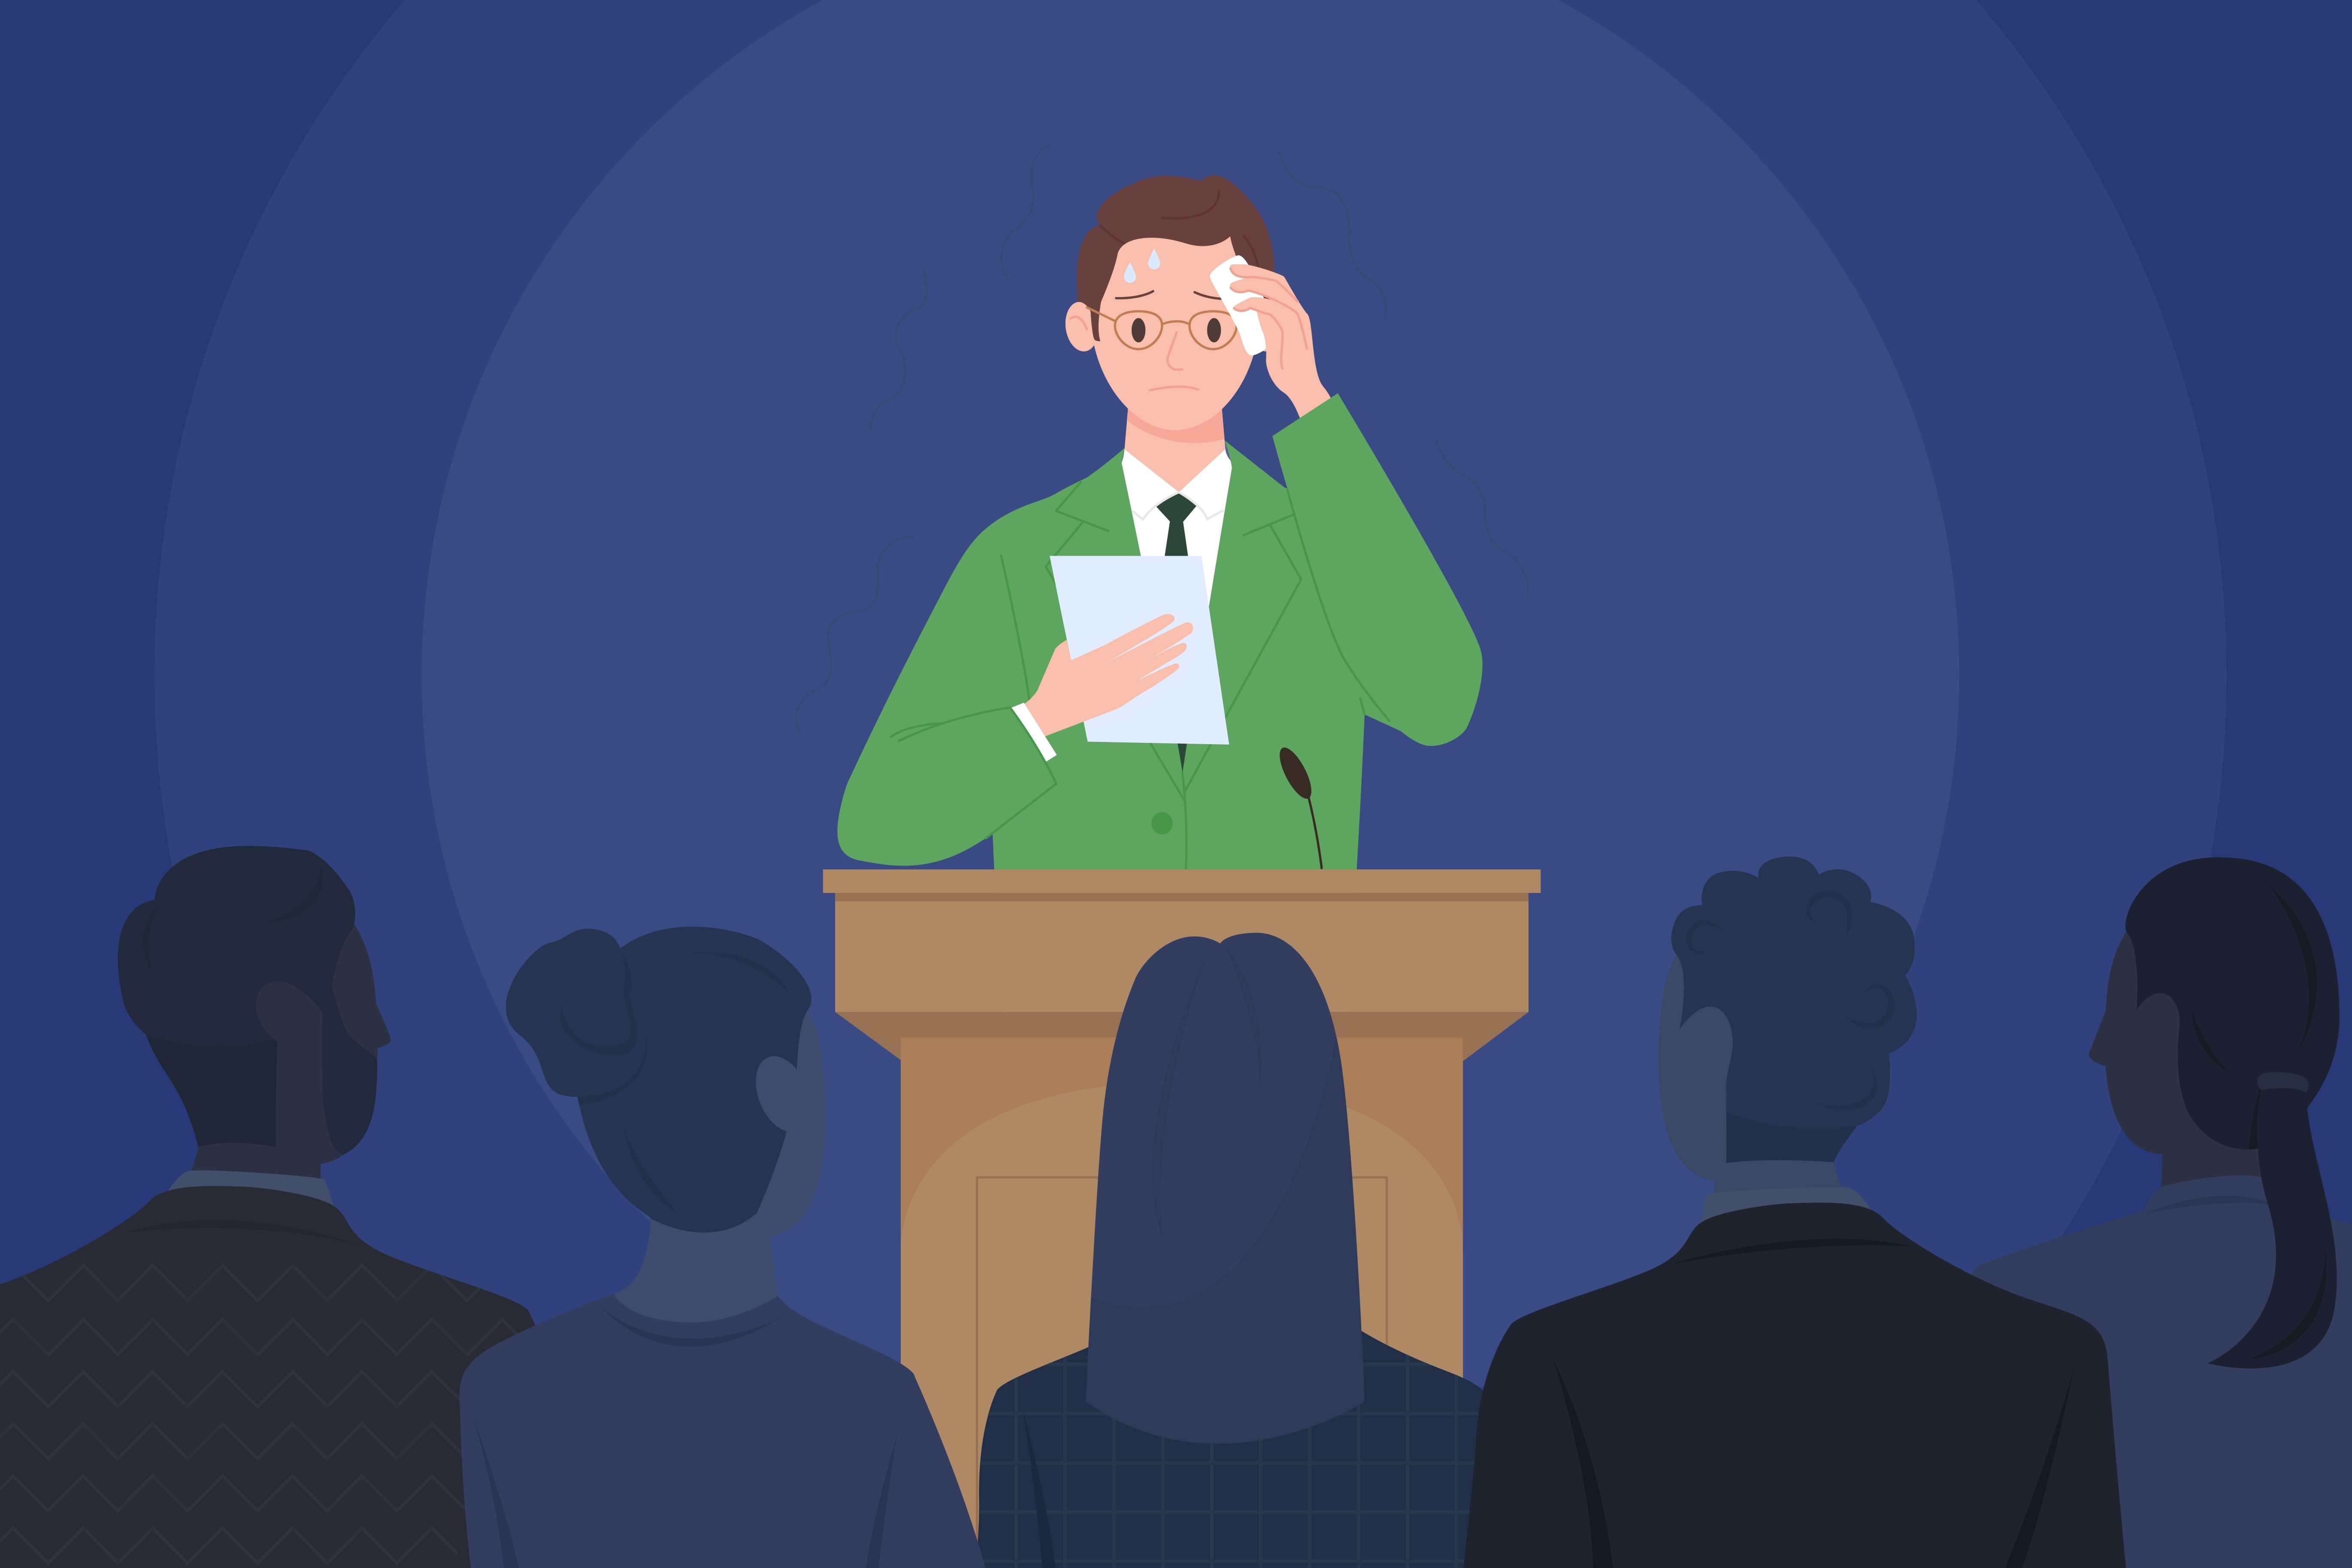 Cartoon nervous male speaker character standing at podium with microphones in front of audience.